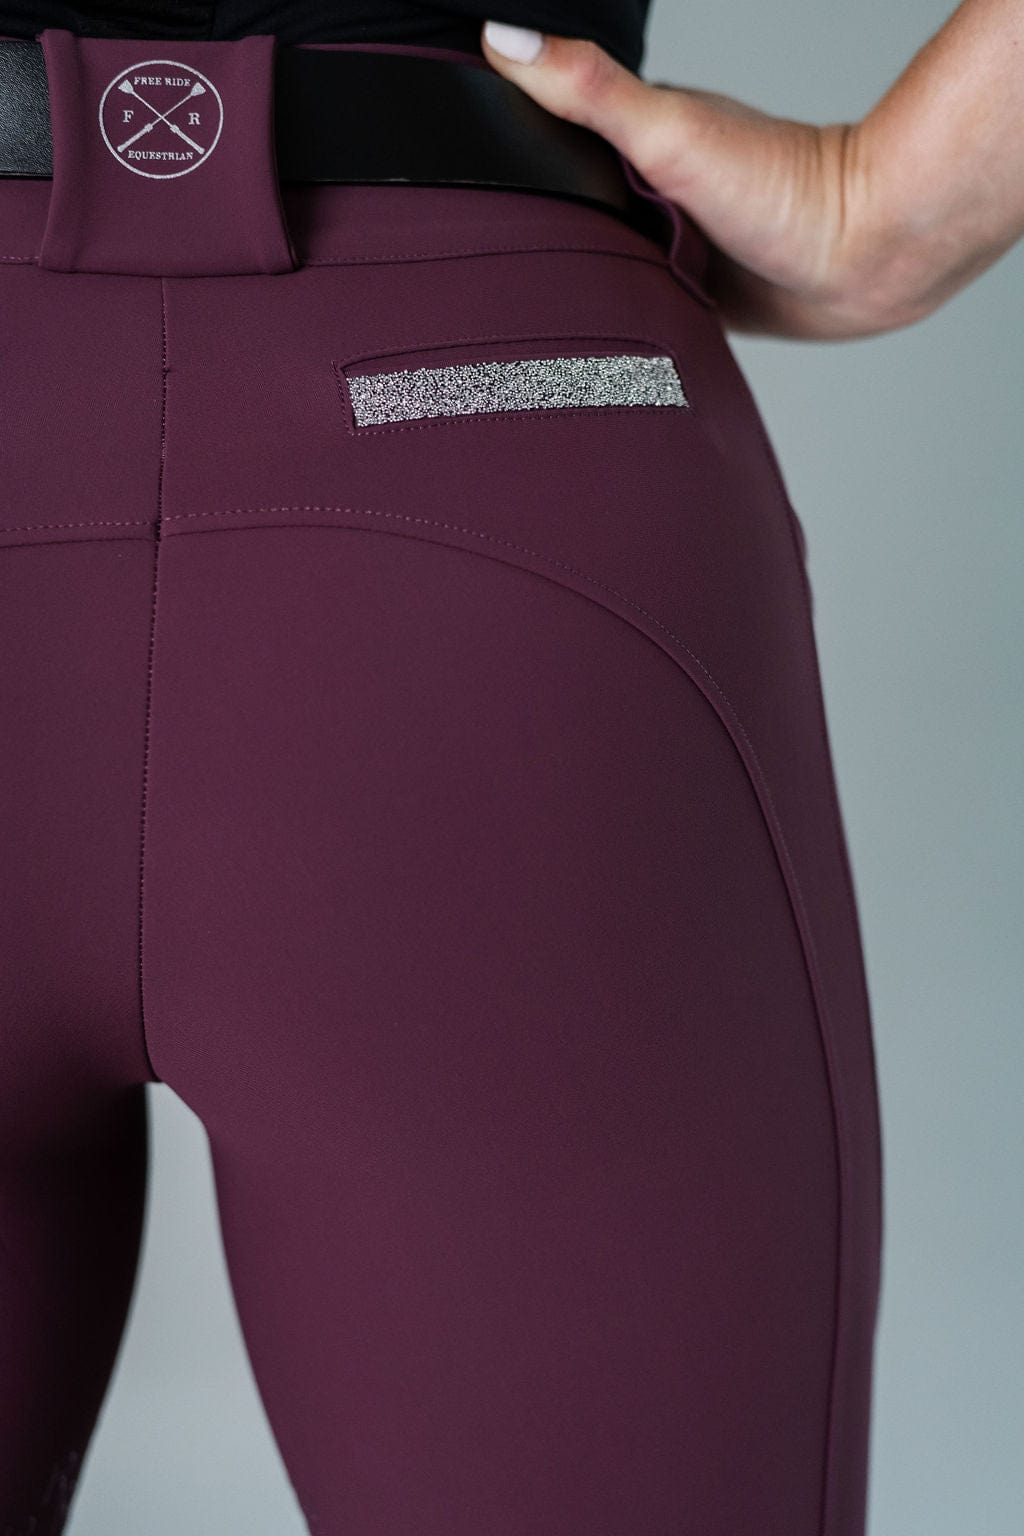 Plum Sparkle PRO 2.0 Athletic Breech | Full Seat or Knee Patch